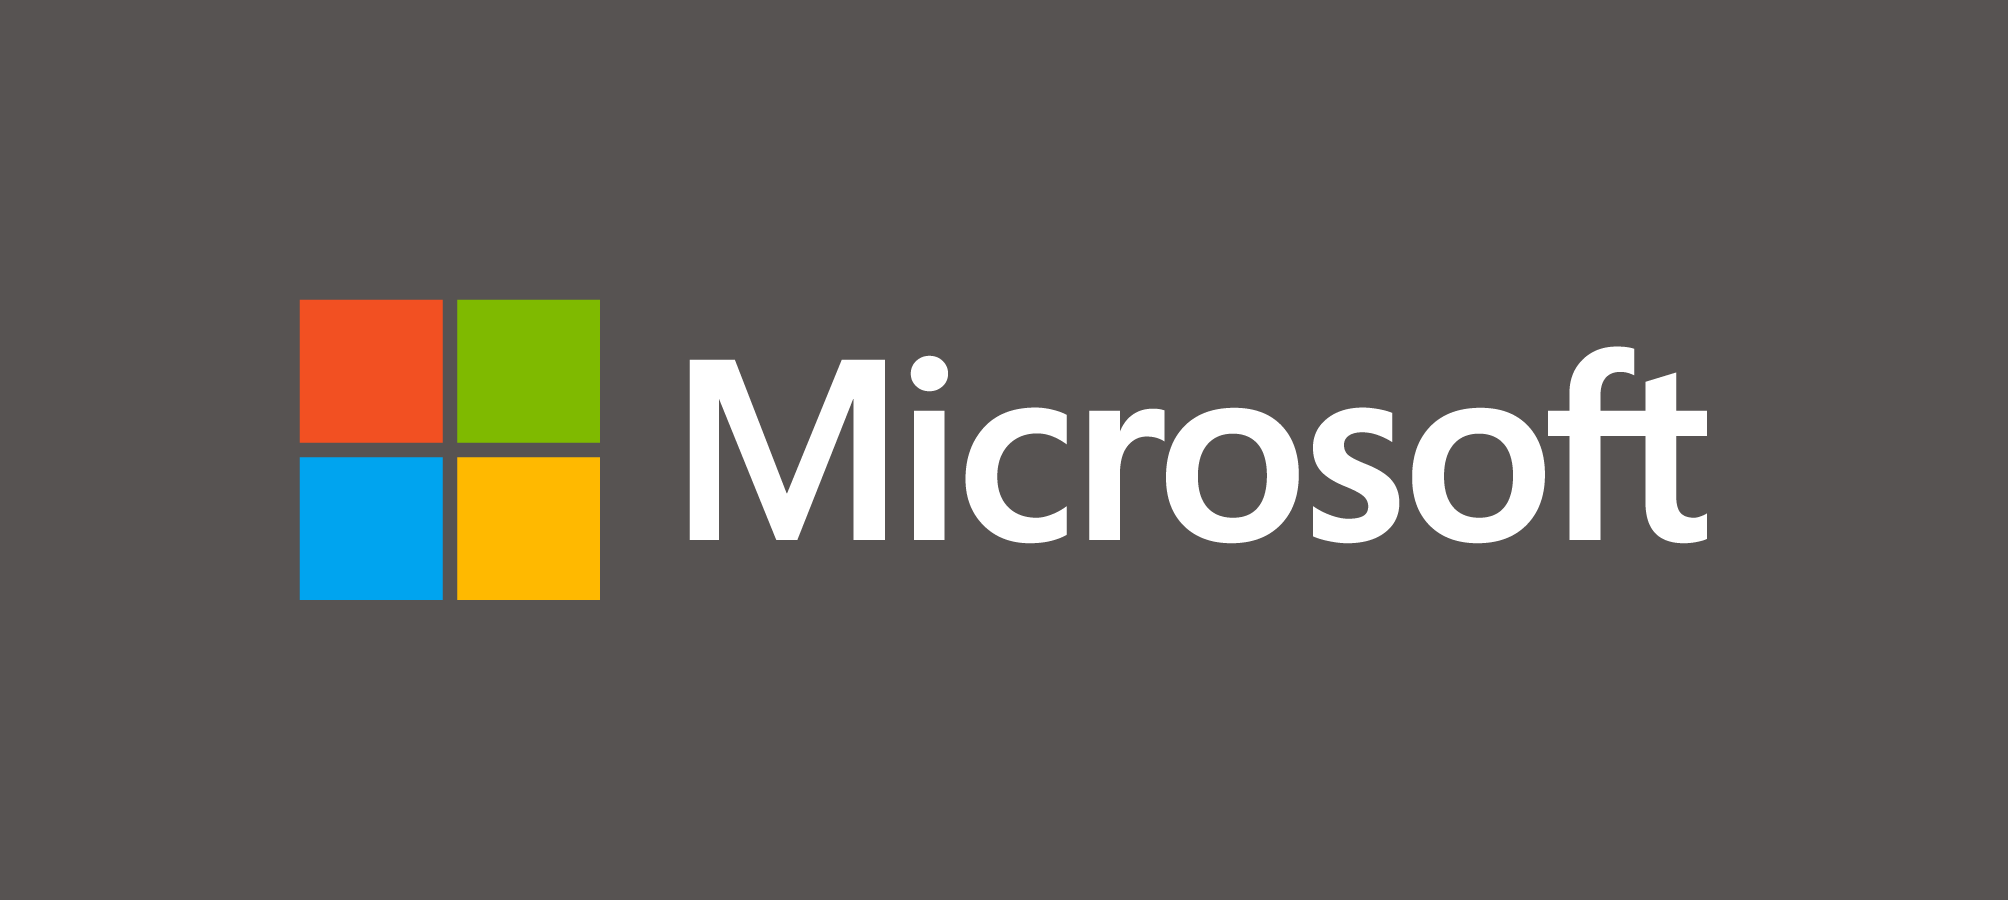 Microsoft rolls out emergency updates to fix Security flaws on ...